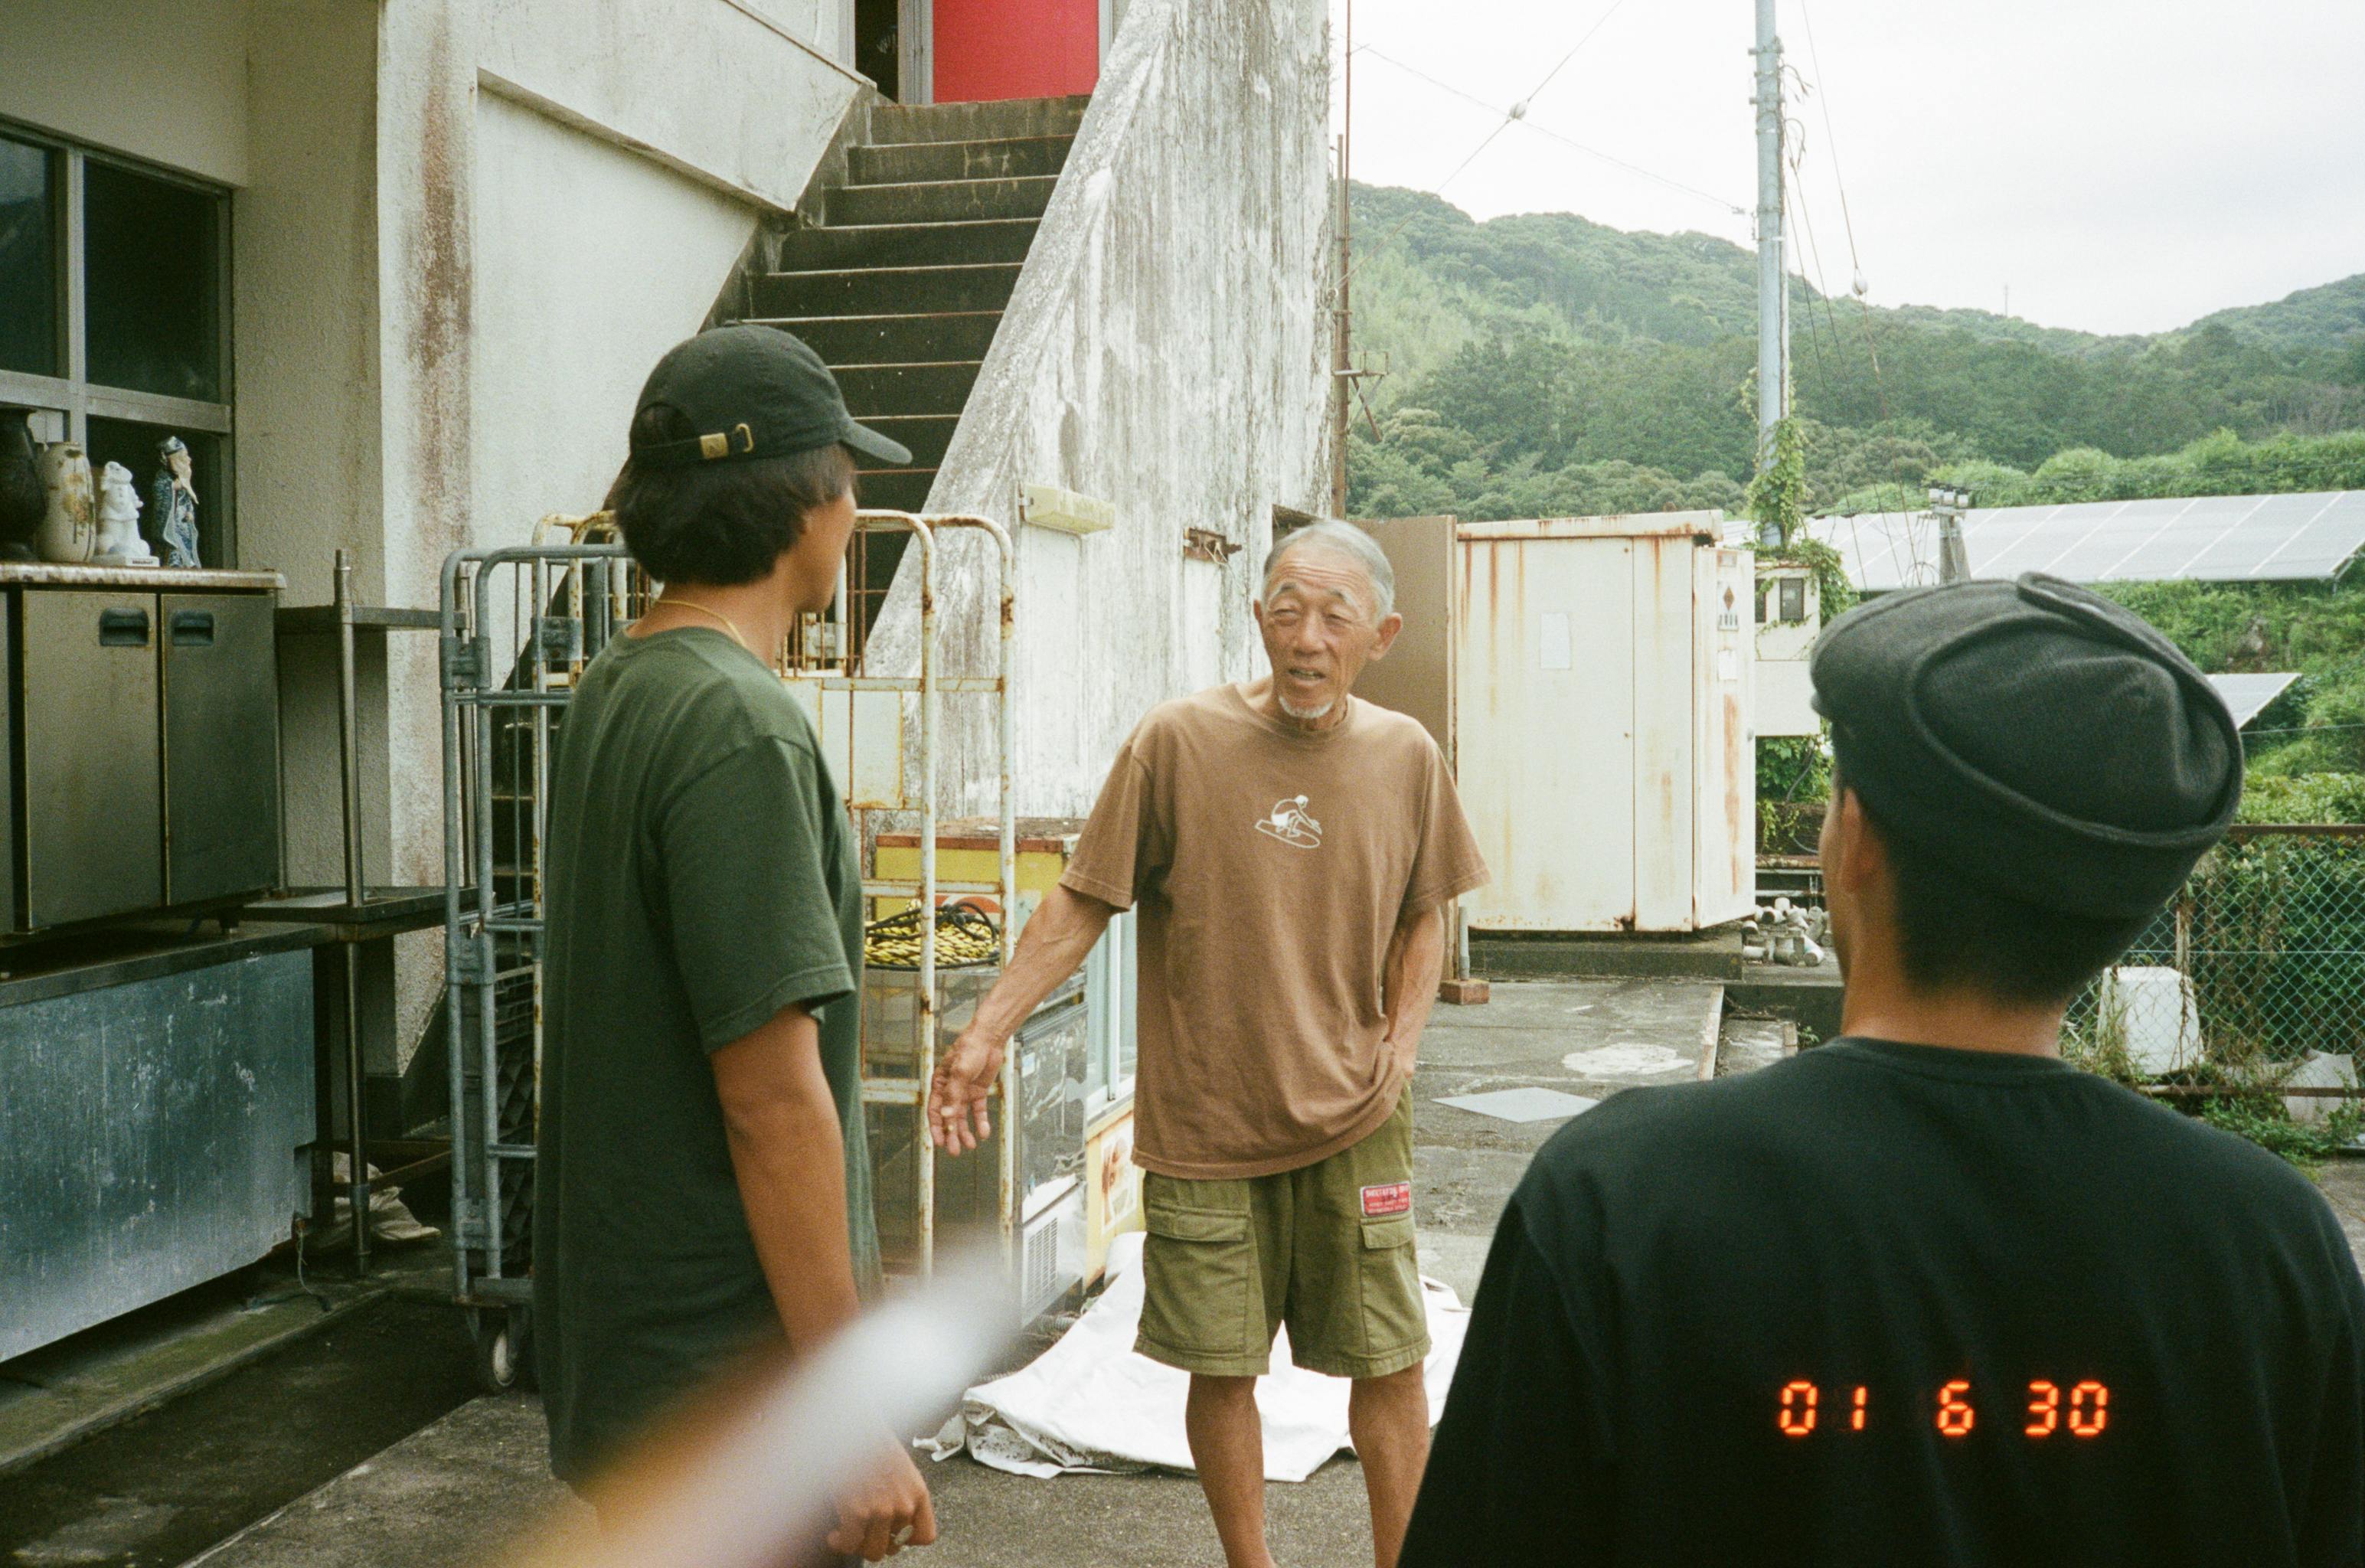 upcoming-studio-wasted-talent-oakley-surf-in-japan-history-bts.jpg